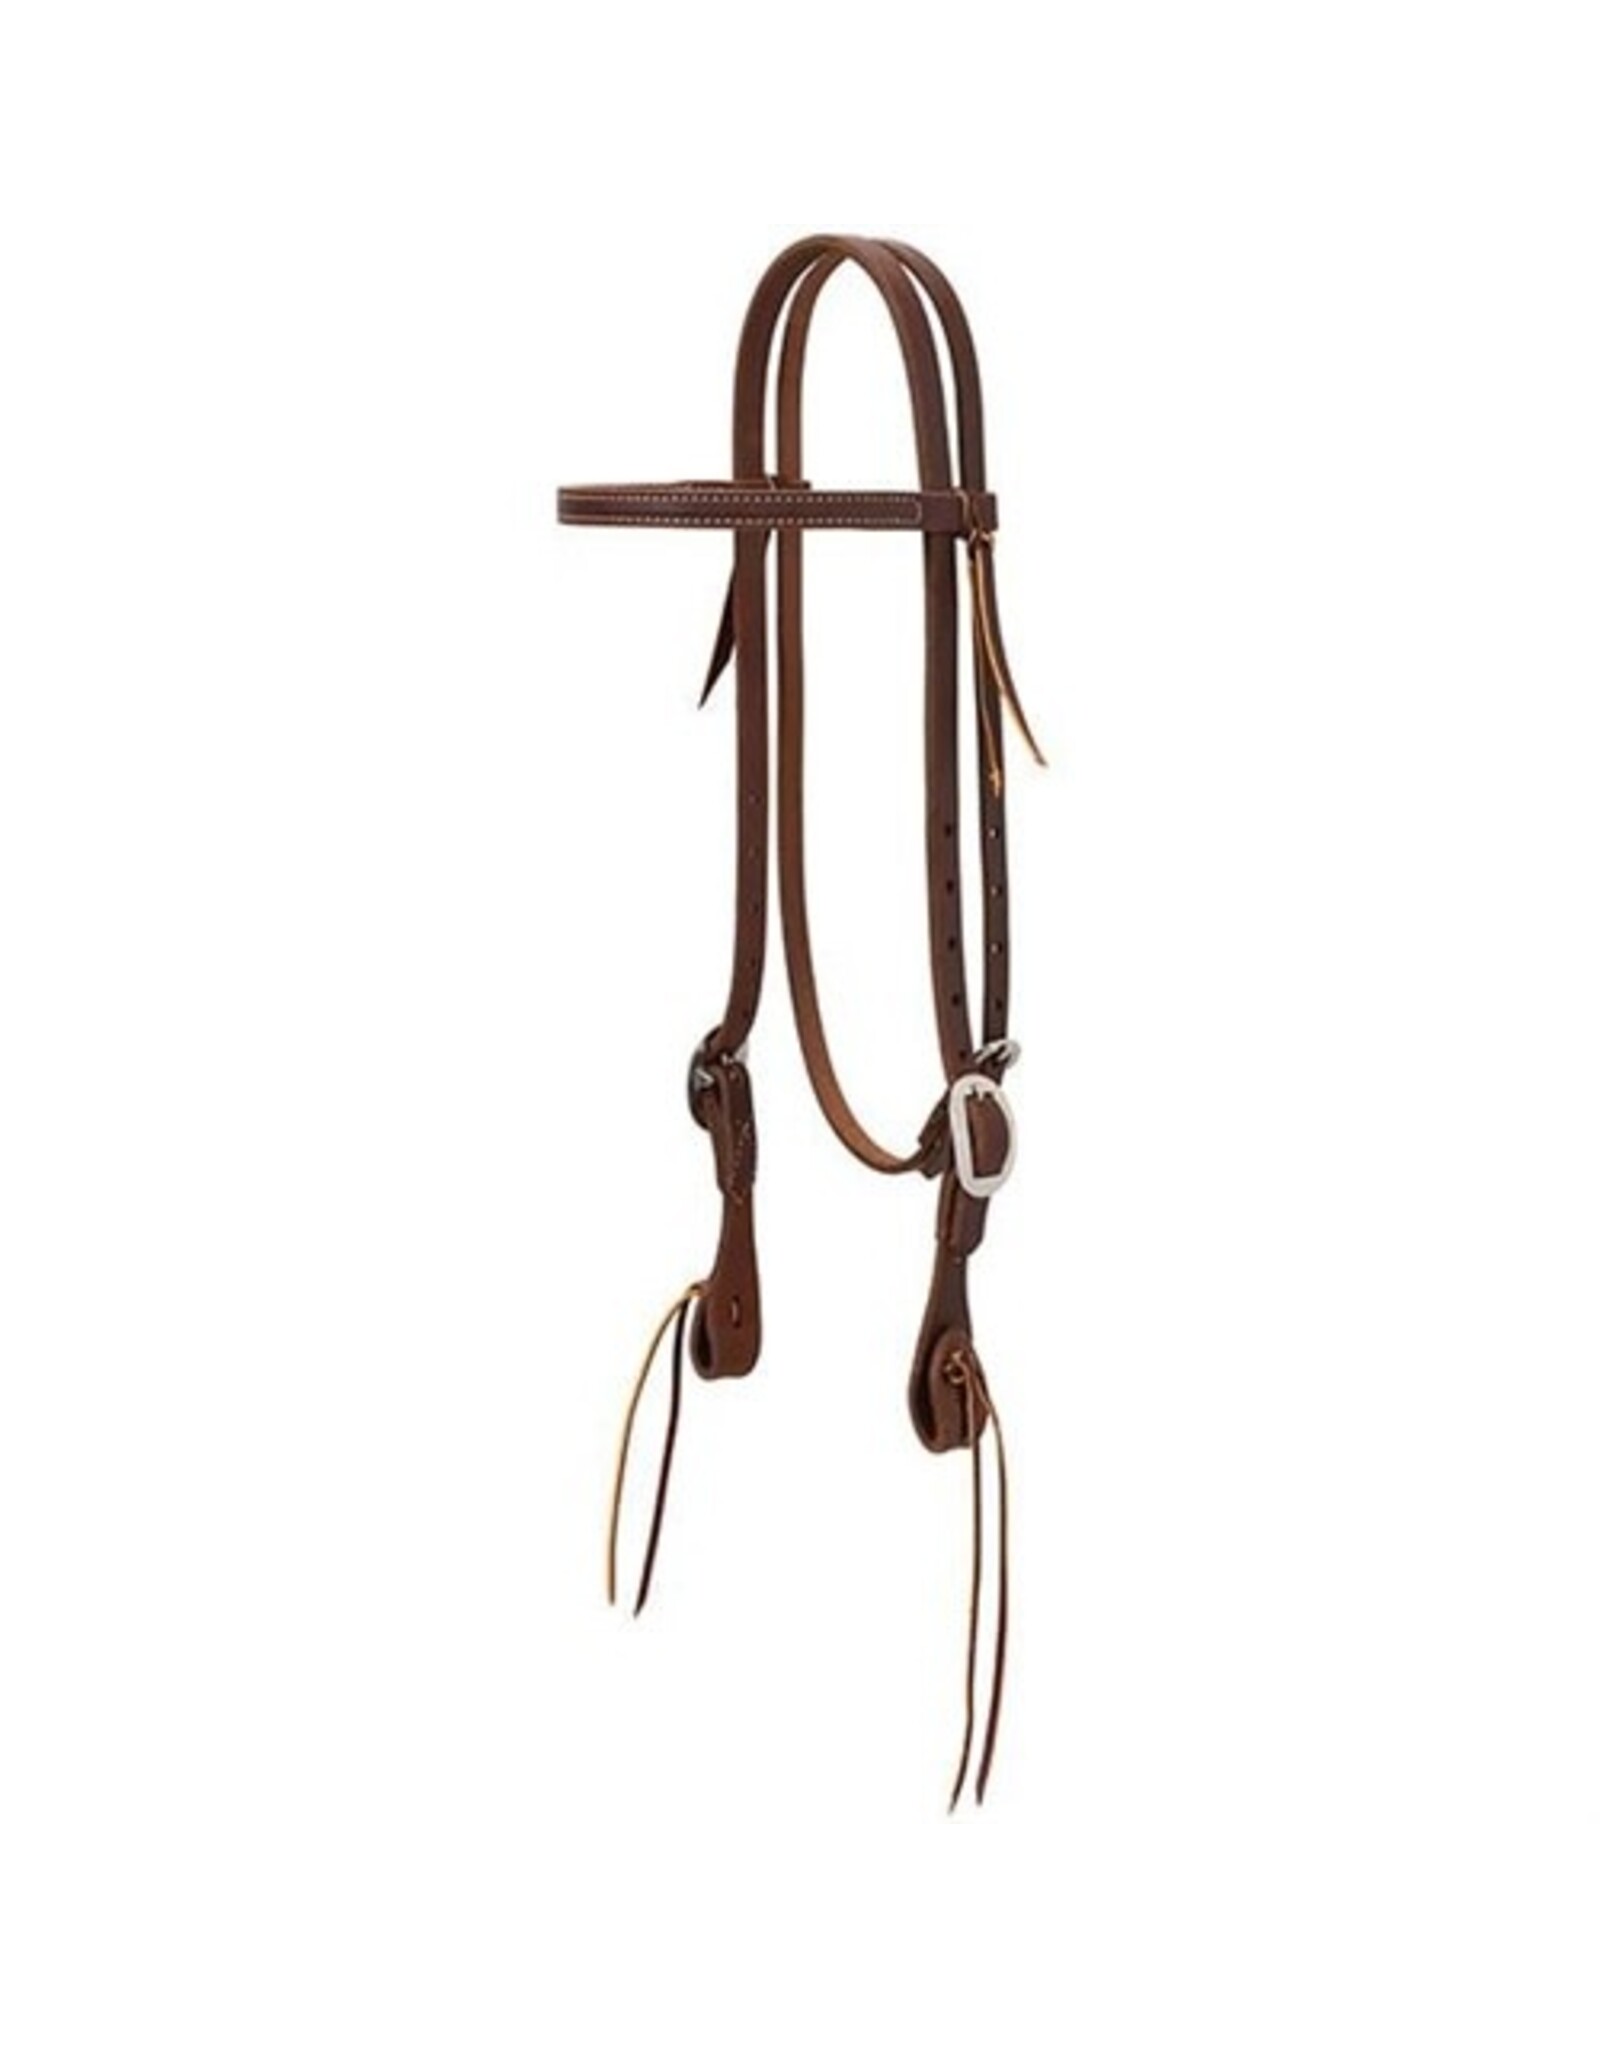 Weaver Canyon Rose Pineapple Knot Browband Headstall 10-0780